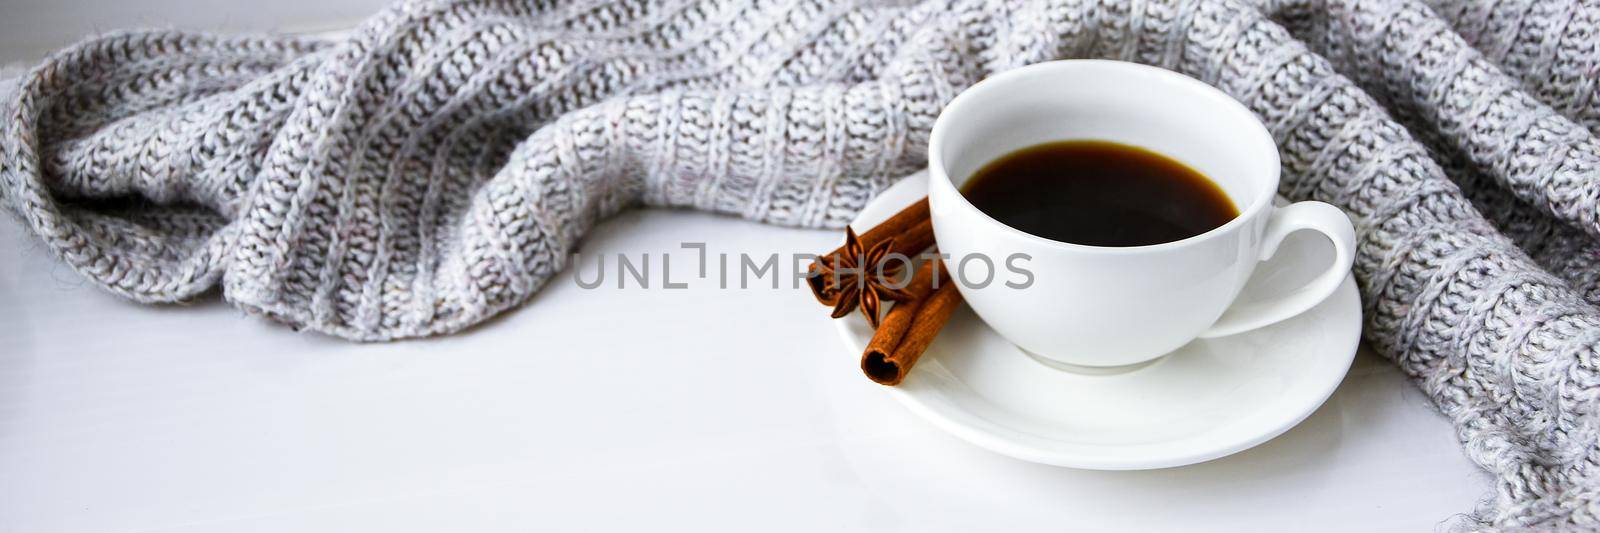 Cup of coffee with cinnamon sticks and anise star on white background. Sweater around. Winter morning routine. Coffee break. Copy space. by anna_stasiia